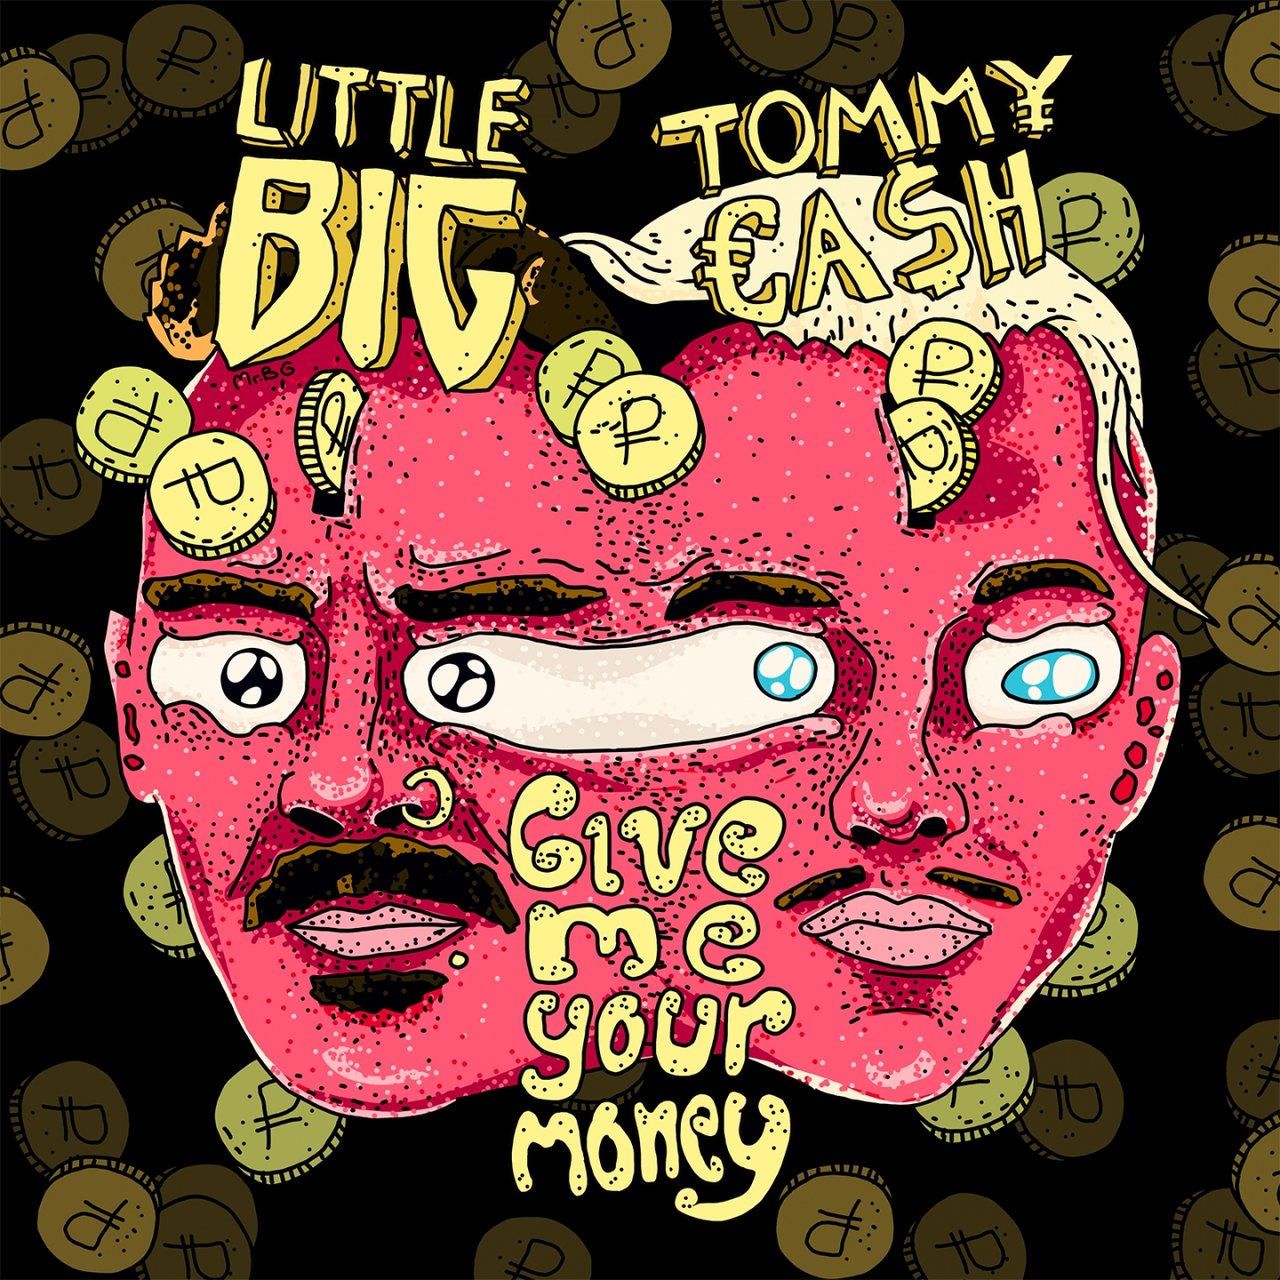 Little Big ft. featuring Tommy Cash Give Me Your Money cover artwork